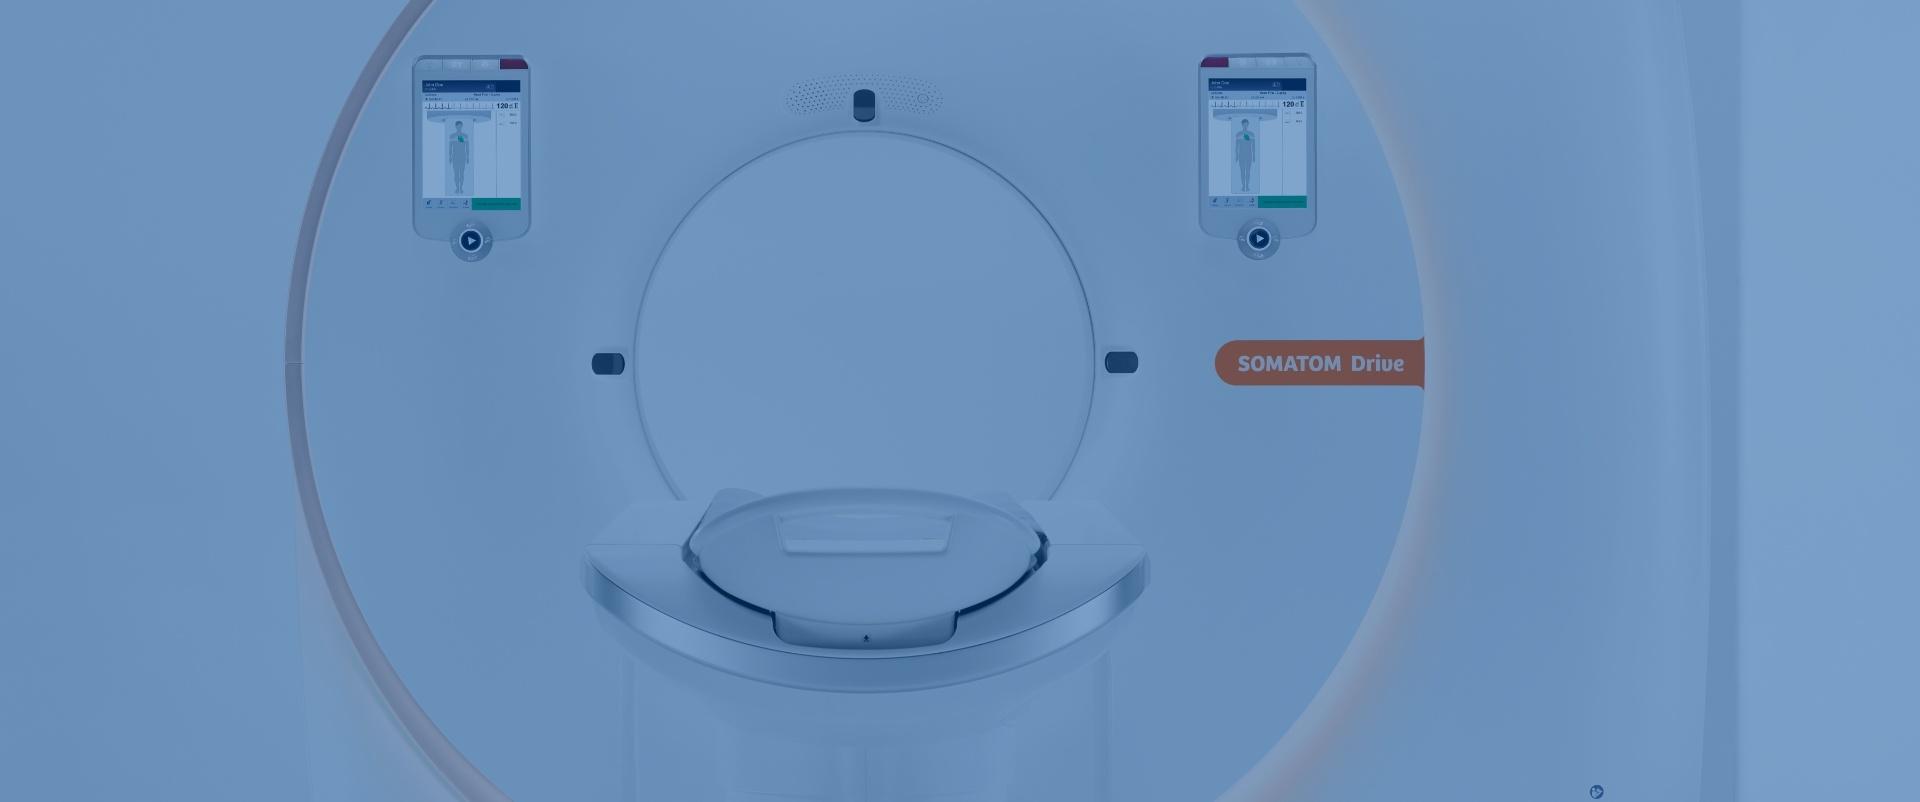 Most Accurate Non‑invasive Imaging Test for CAD